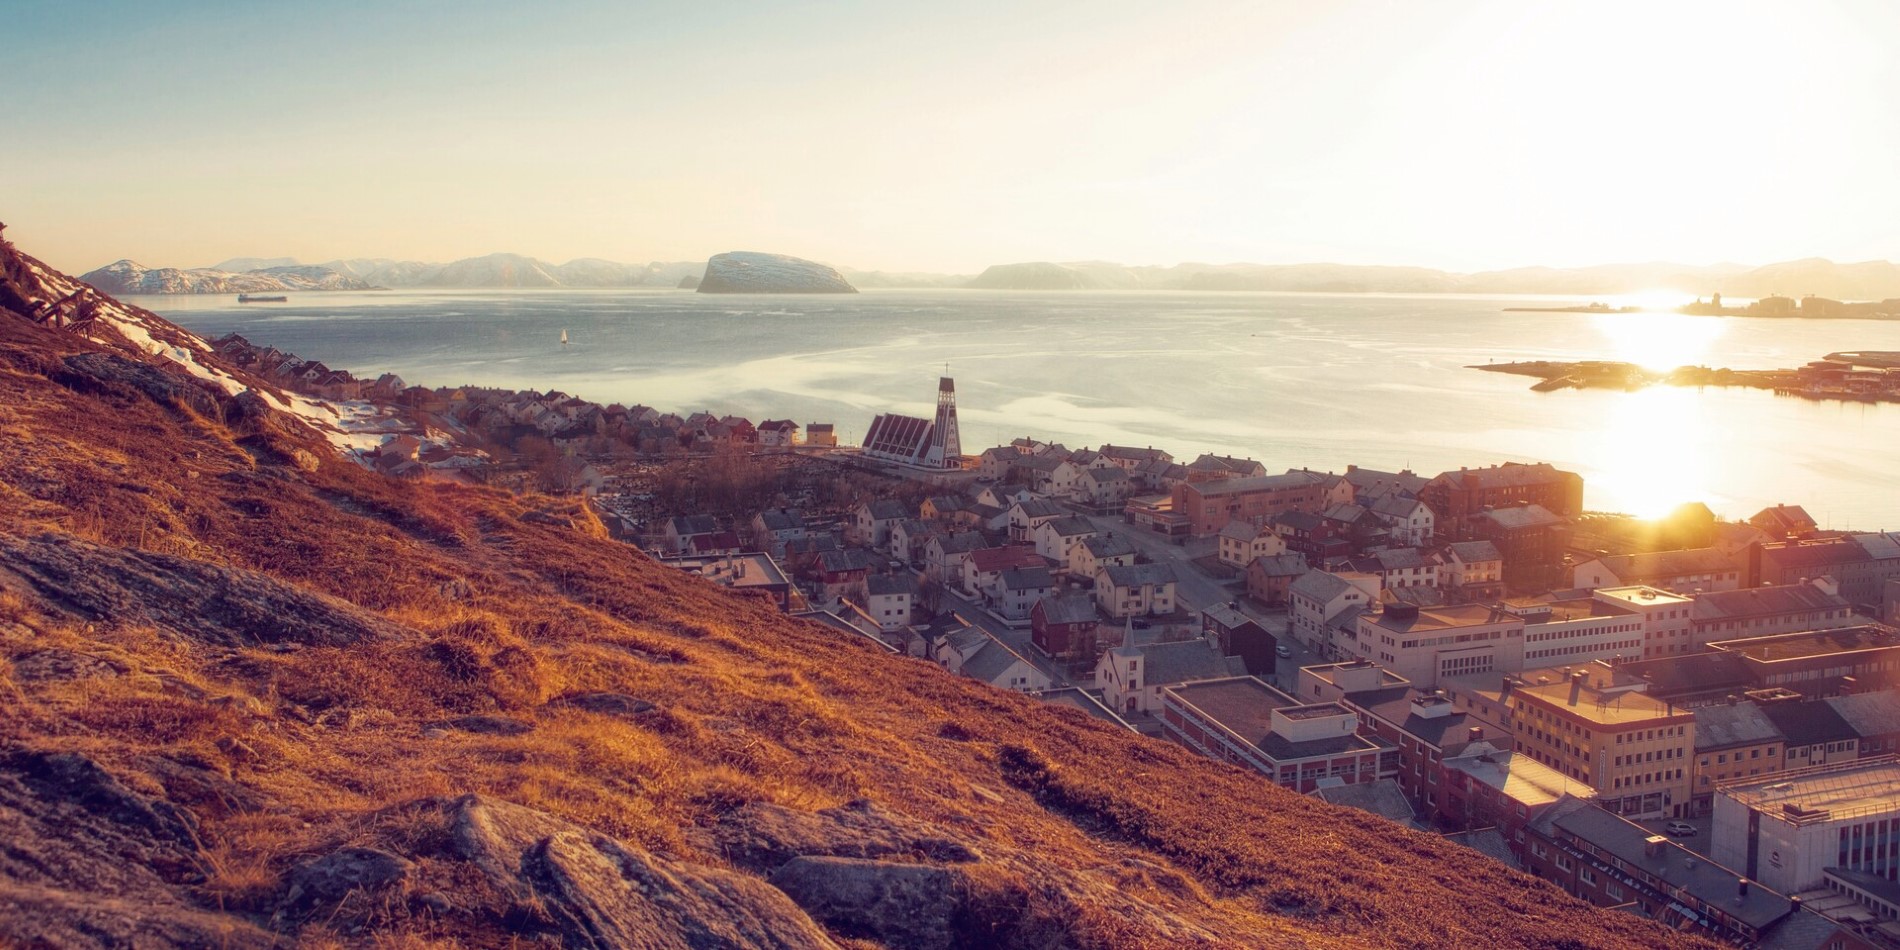 Sunset over the port town of Hammerfest in Norway